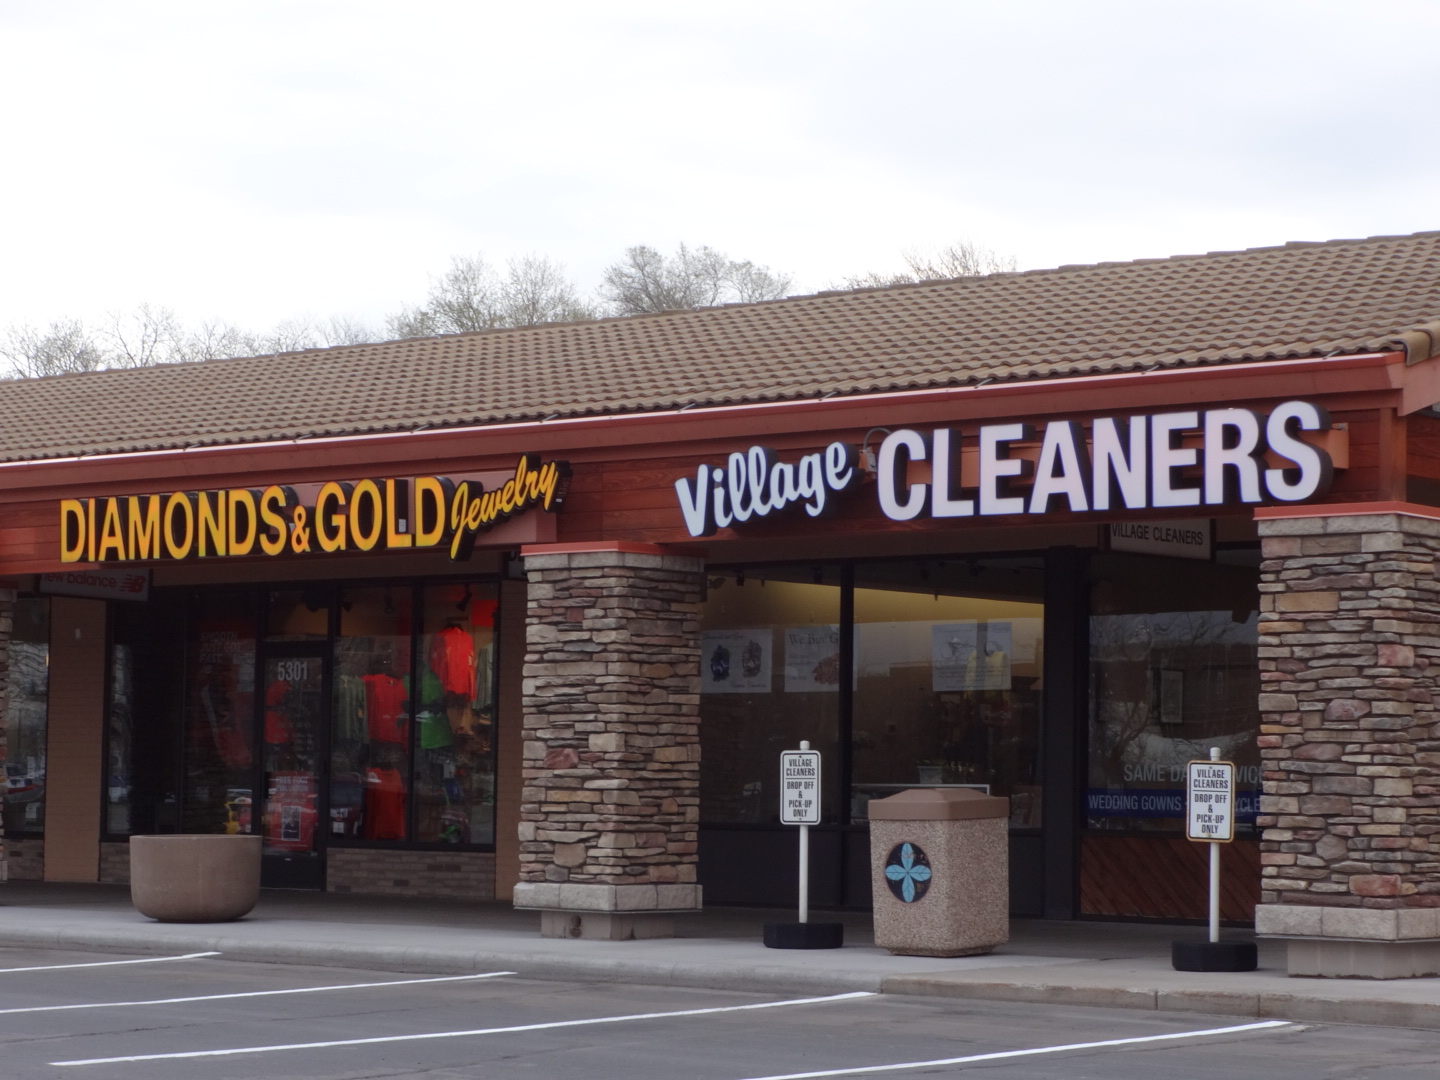 Village Cleaners Diamonds and Gold